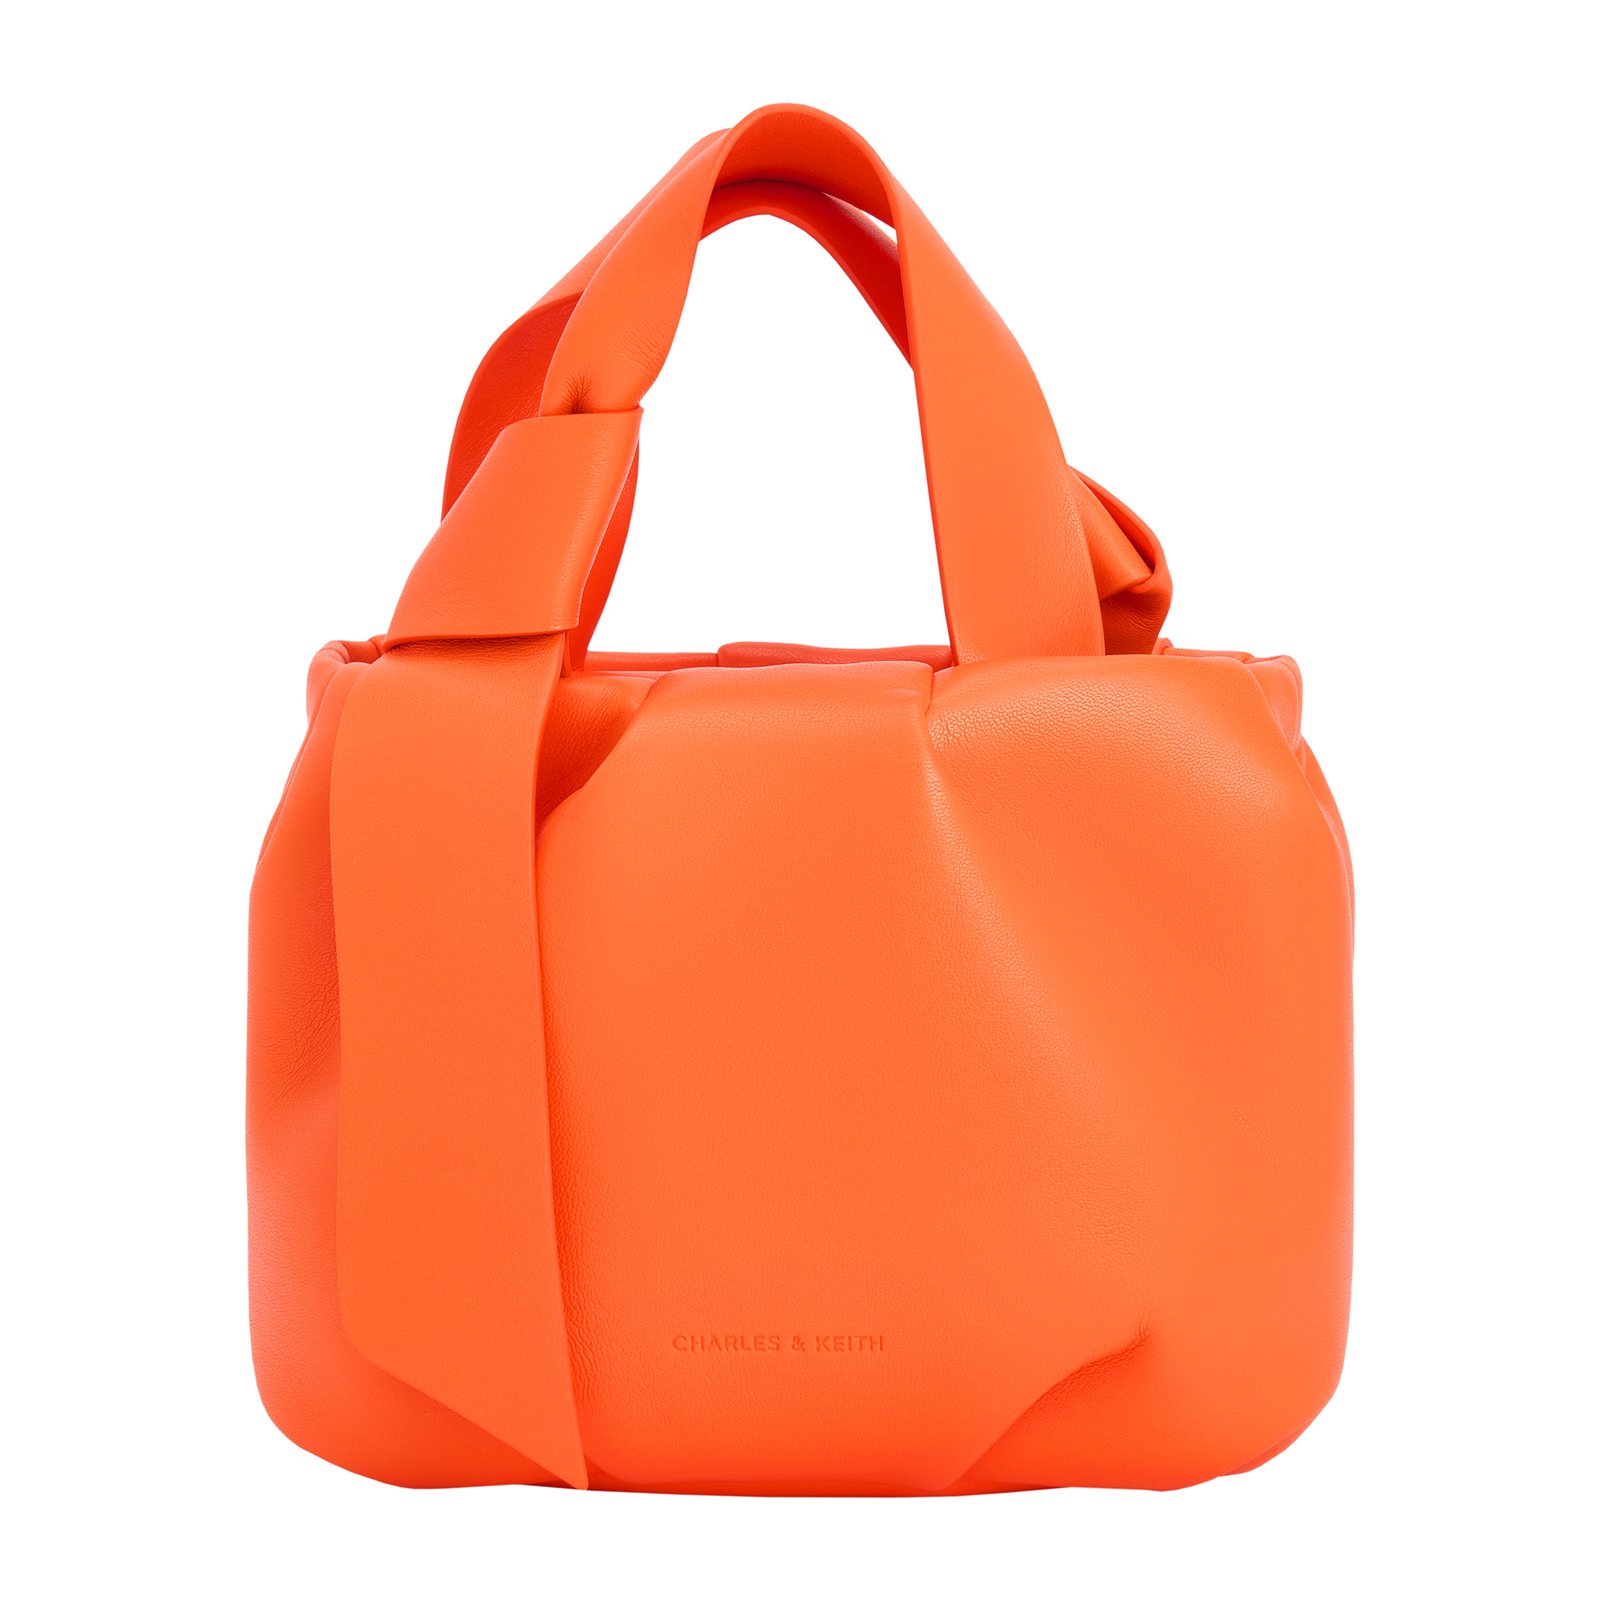 Toni knotted ruched bag by Charles & Keith